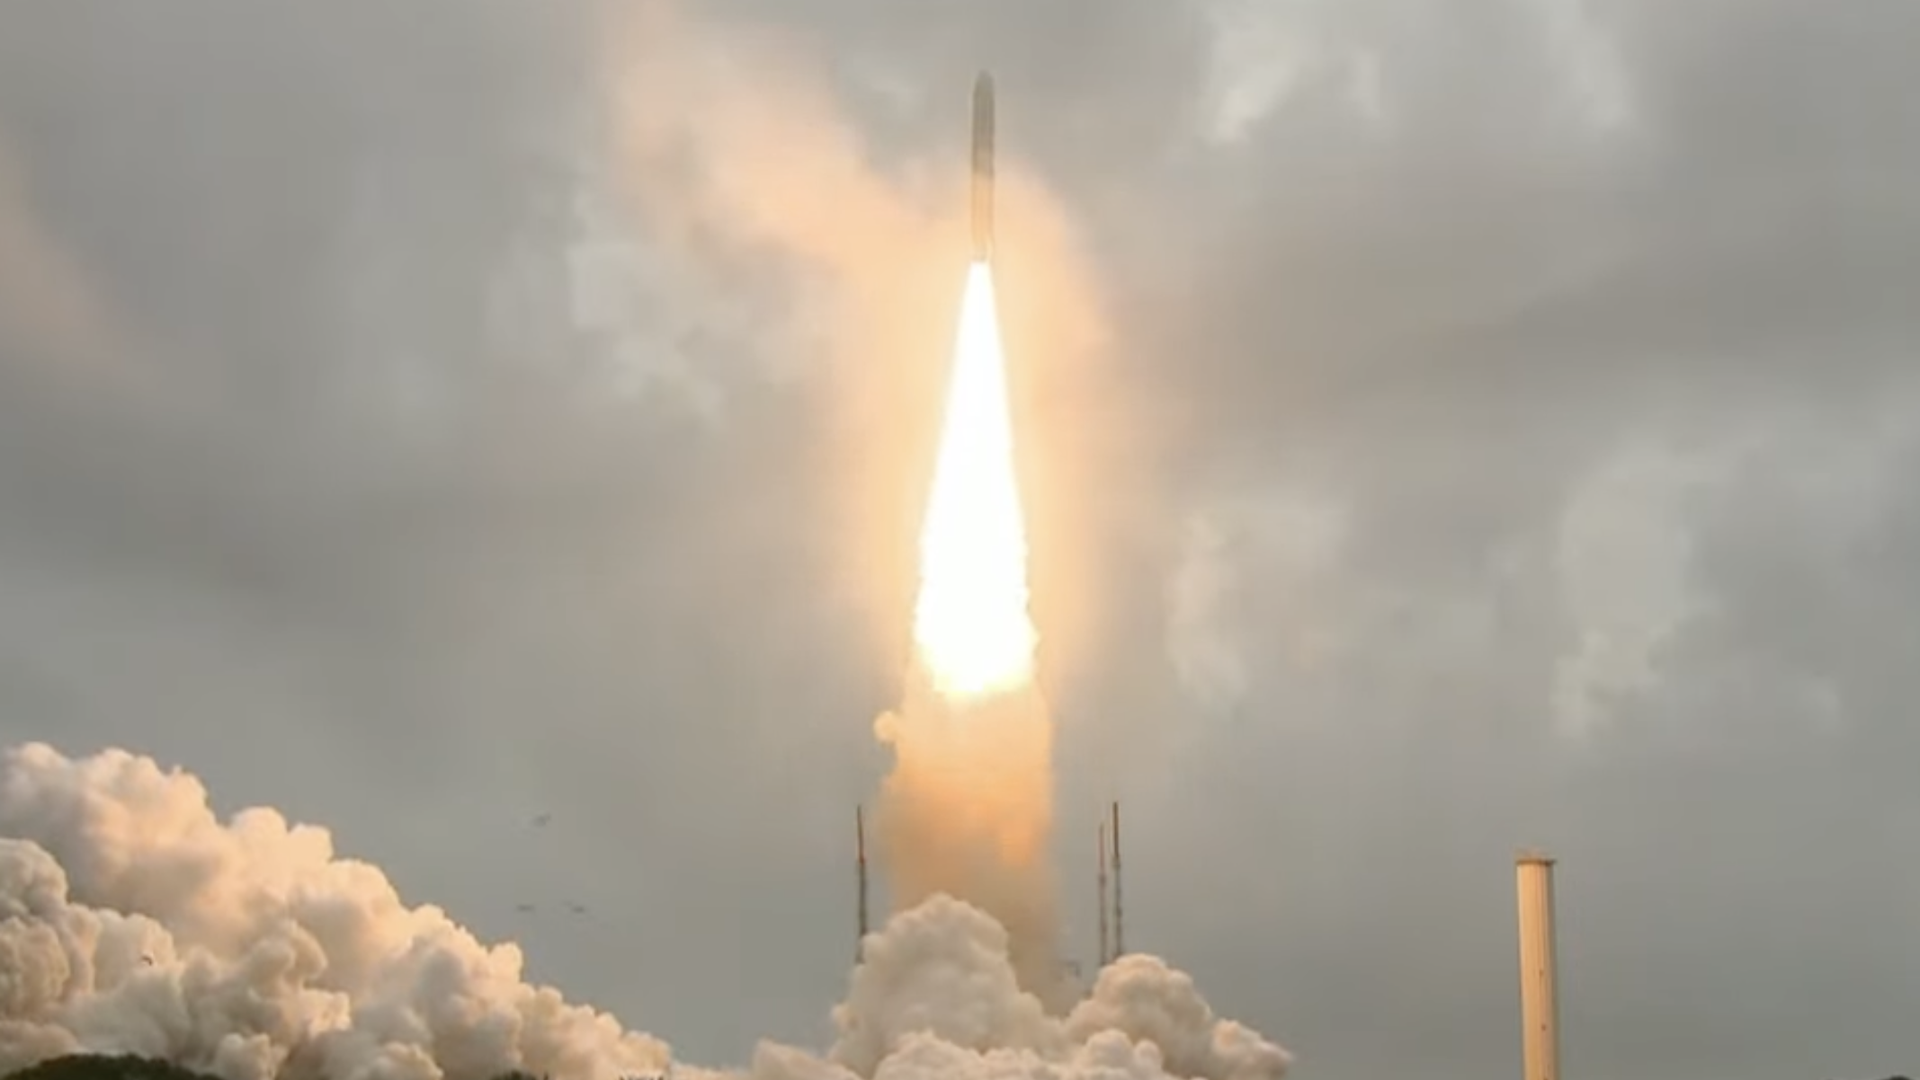 The launch of the James Webb Space Telescope. A rocket launches into clouds